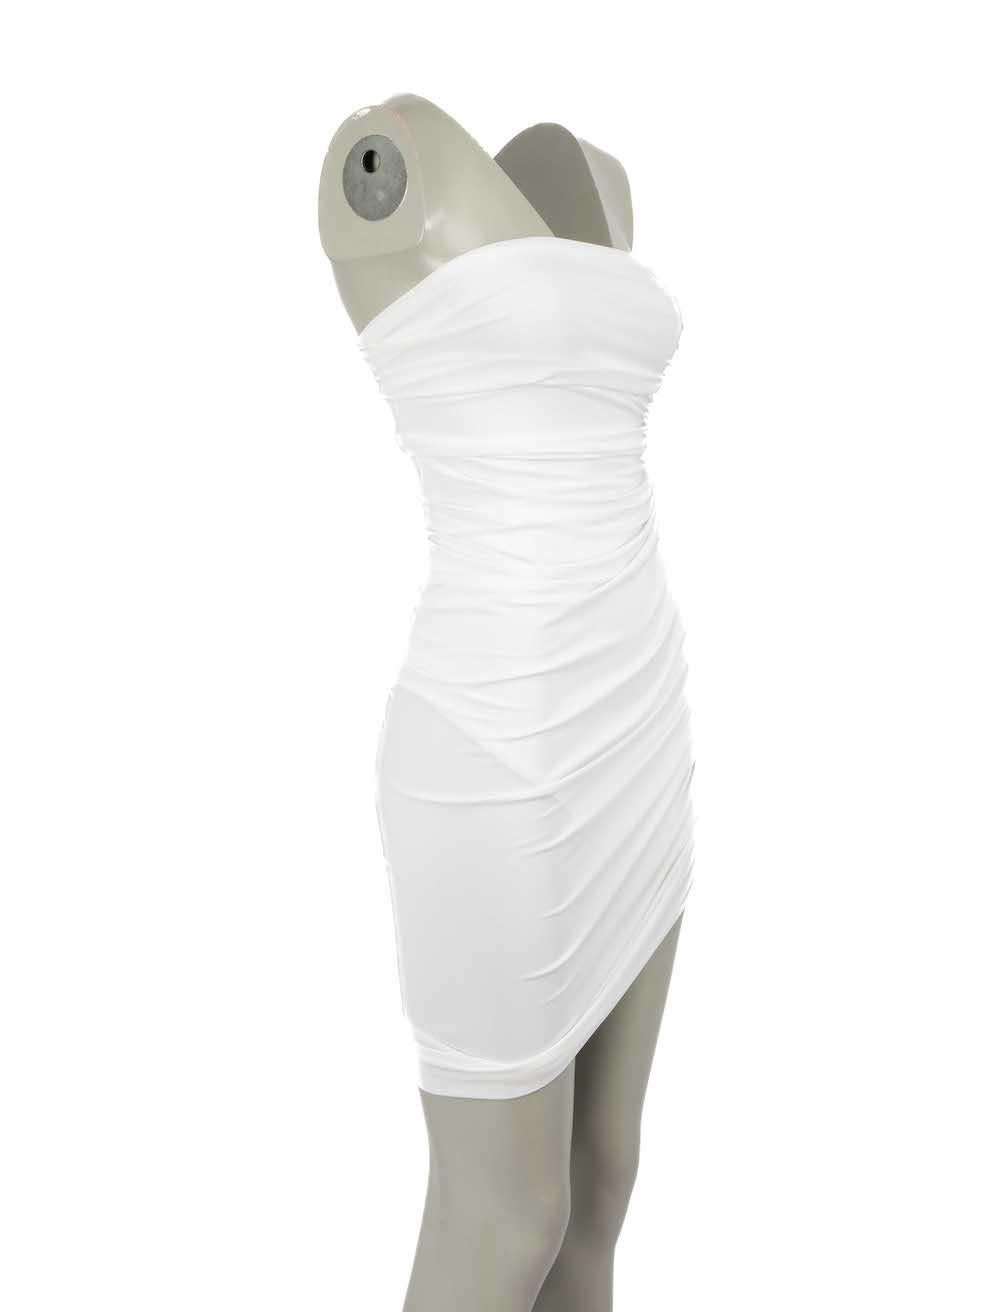 CONDITION is Never worn. No visible wear to dress is evident on this new Norma Kamali designer resale item.
 
Details
White
Polyester
Bodycon dress
Figure hugging fit
Stretchy
Strapless
Ruched side
Asymmetric hem
Built in shorts
 
Made in China
